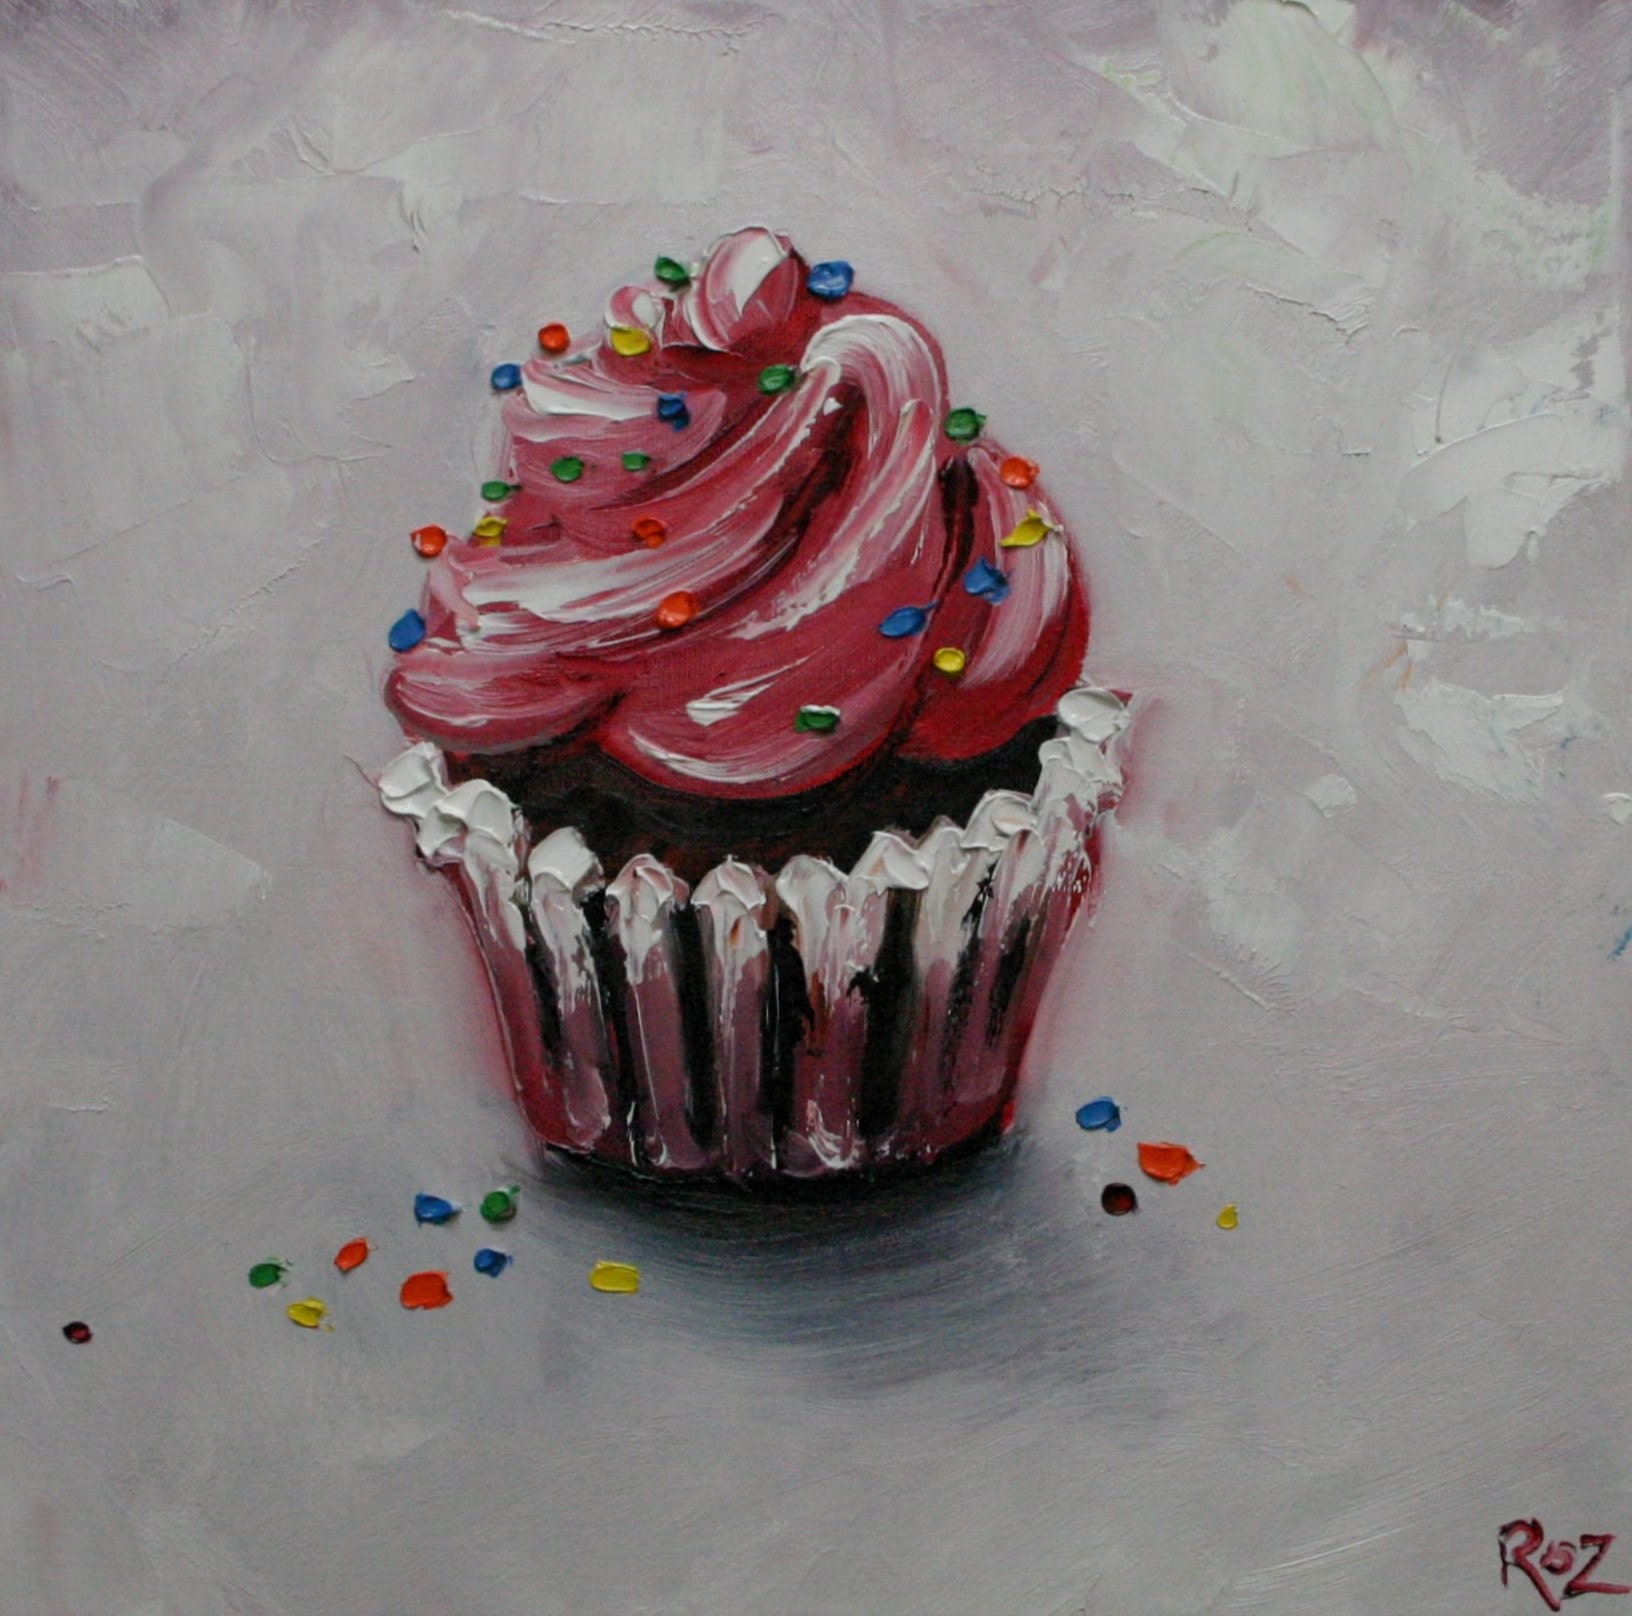 Cupcake 90 12x12 inch original oil painting by Roz